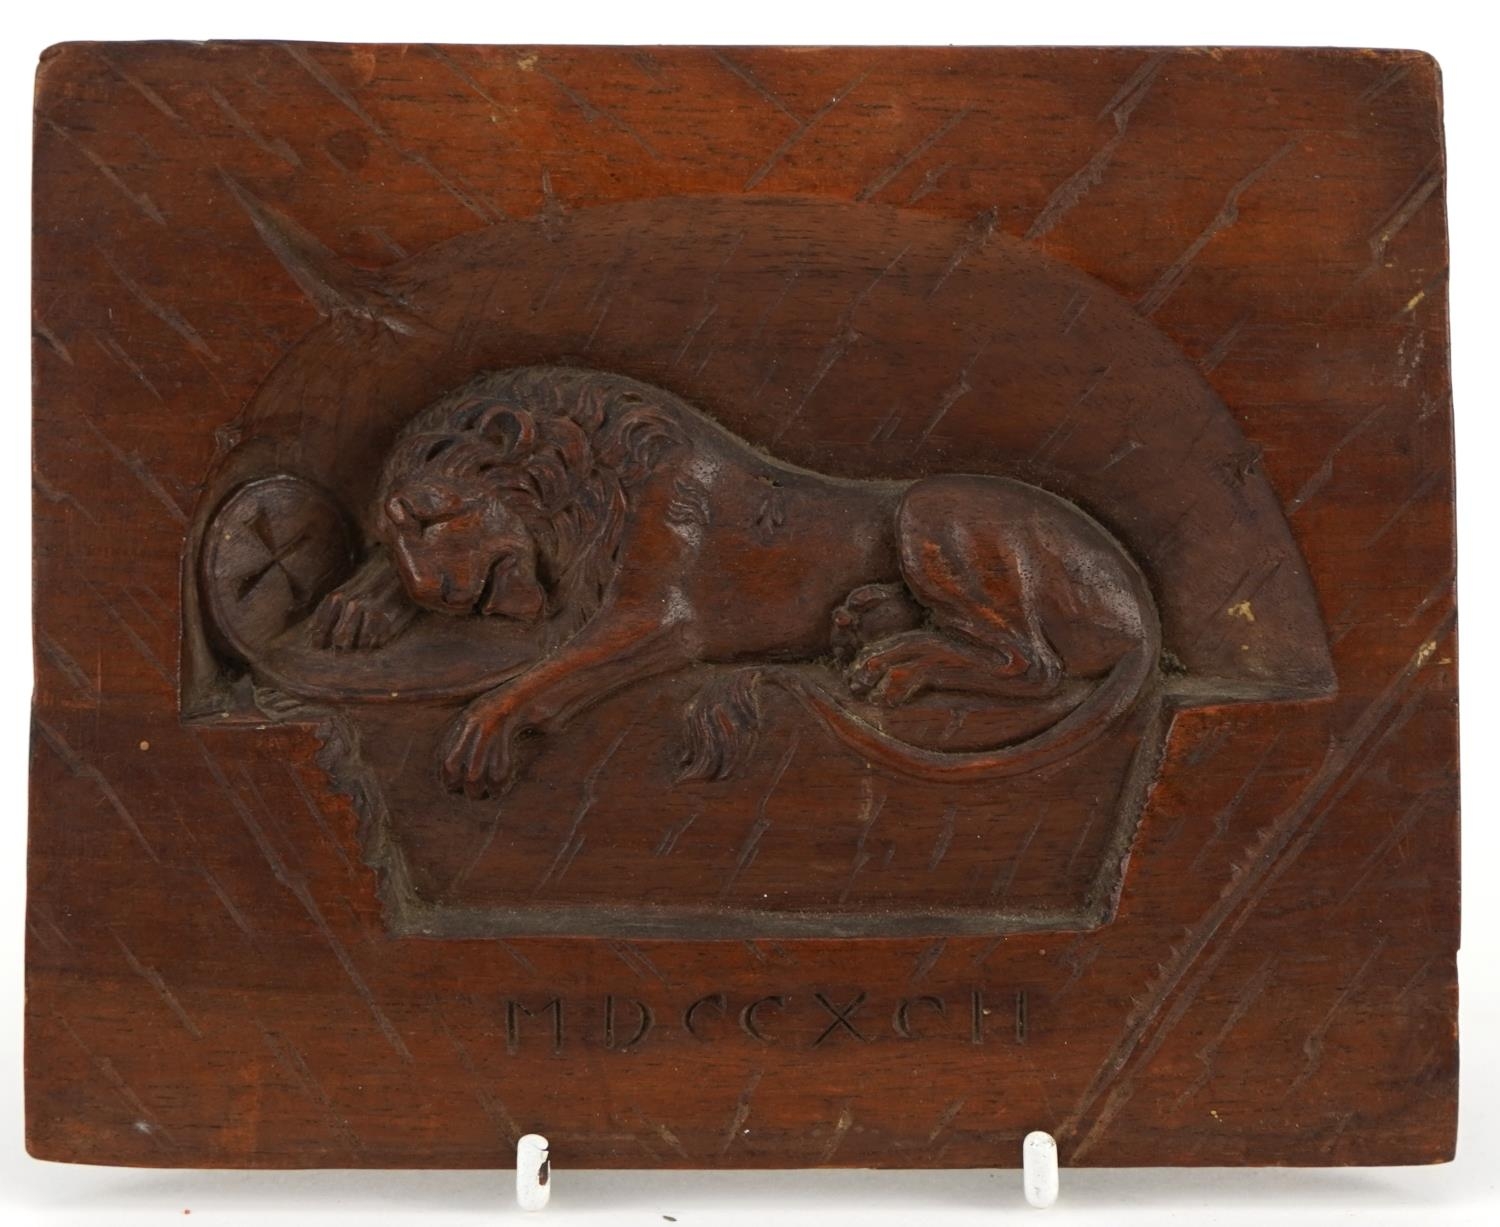 19th century continental memorial carving of The Lion of Lucerne, 16cm x 12.5cm